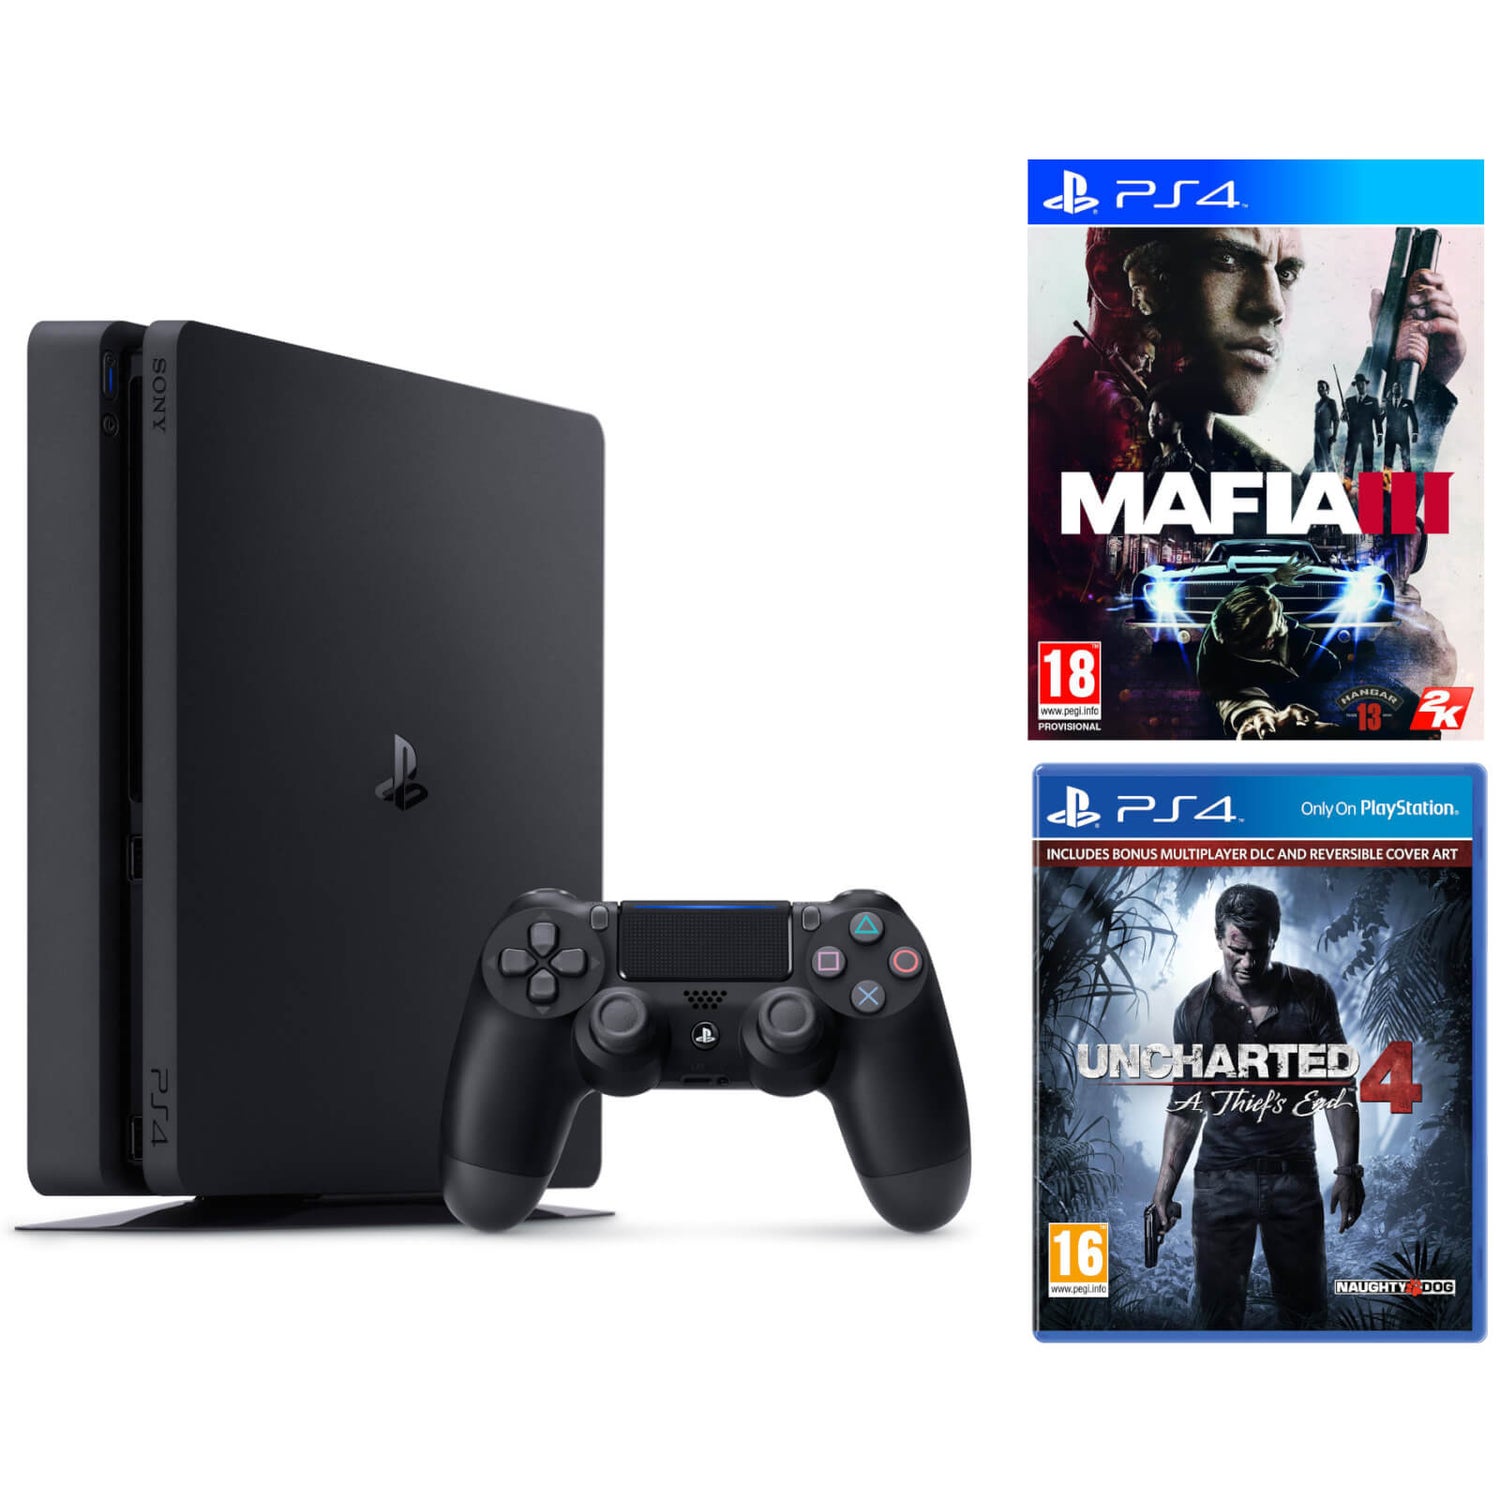 PlayStation 4 Slim 500GB Console - Includes Uncharted 4 and Mafia III Games  Consoles - Zavvi UK